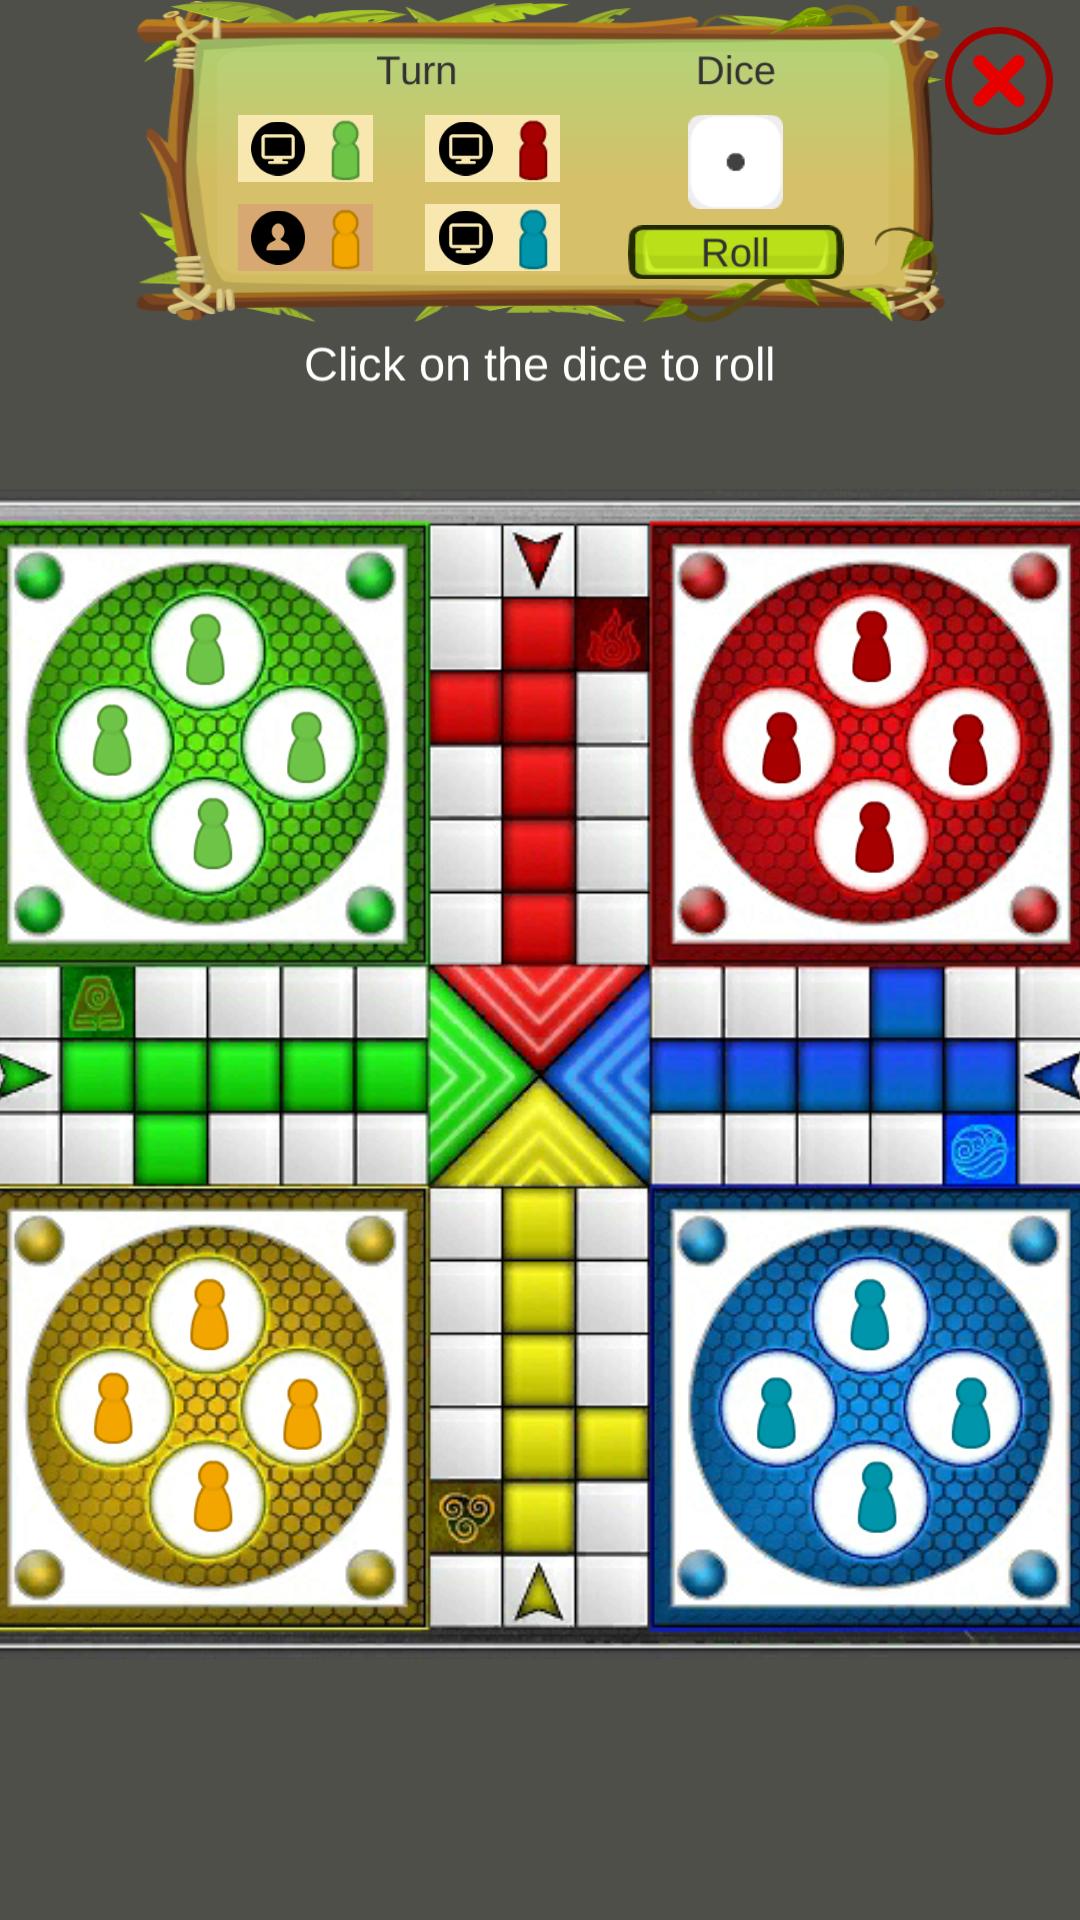 Ludo (Board game) for Android - APK Download